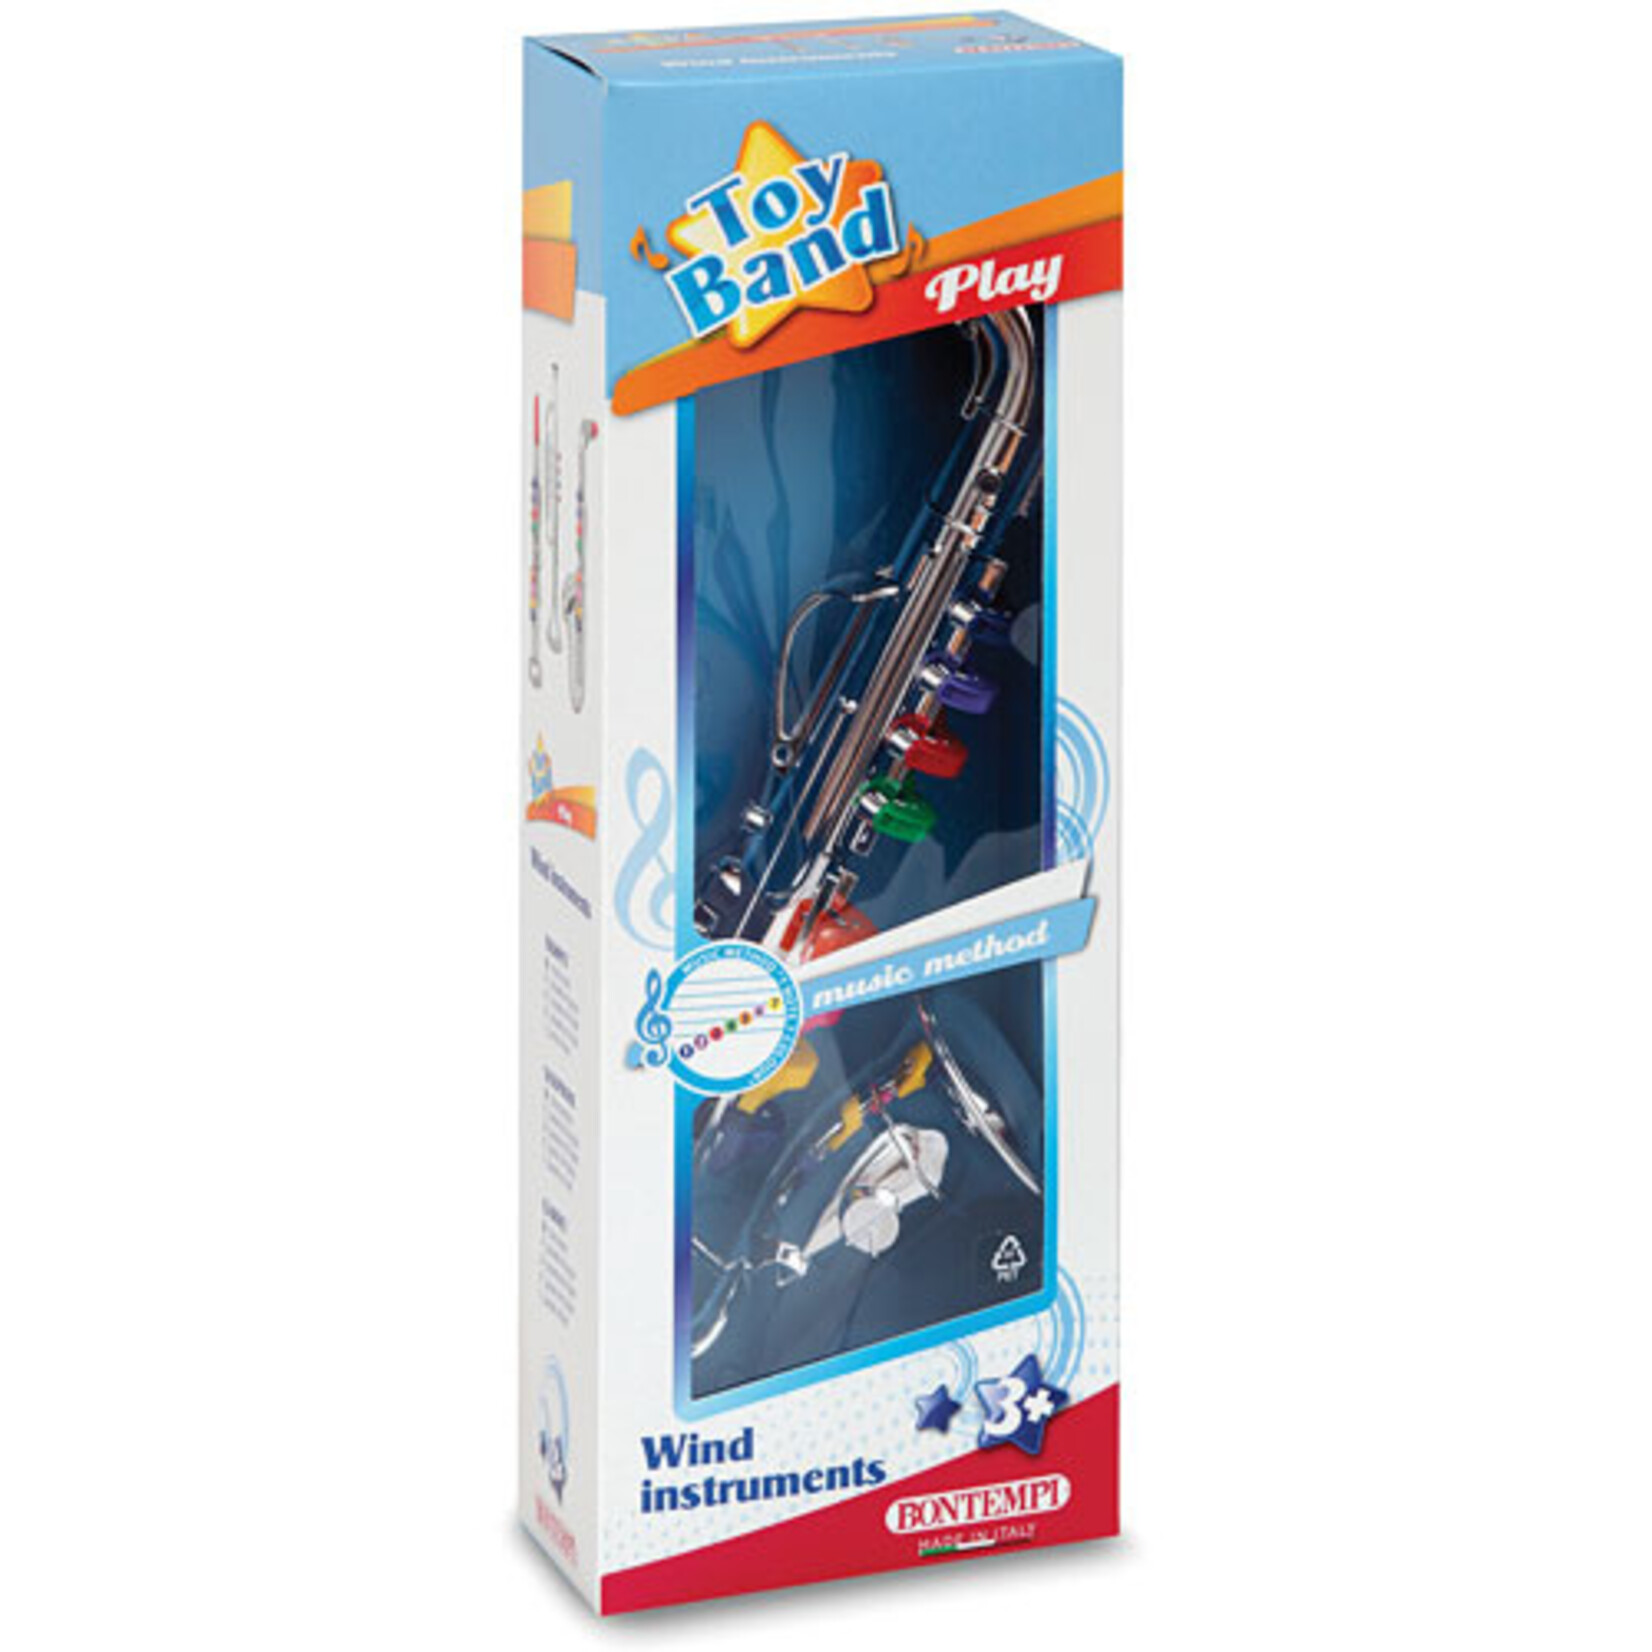 Boxed Saxophone Toy